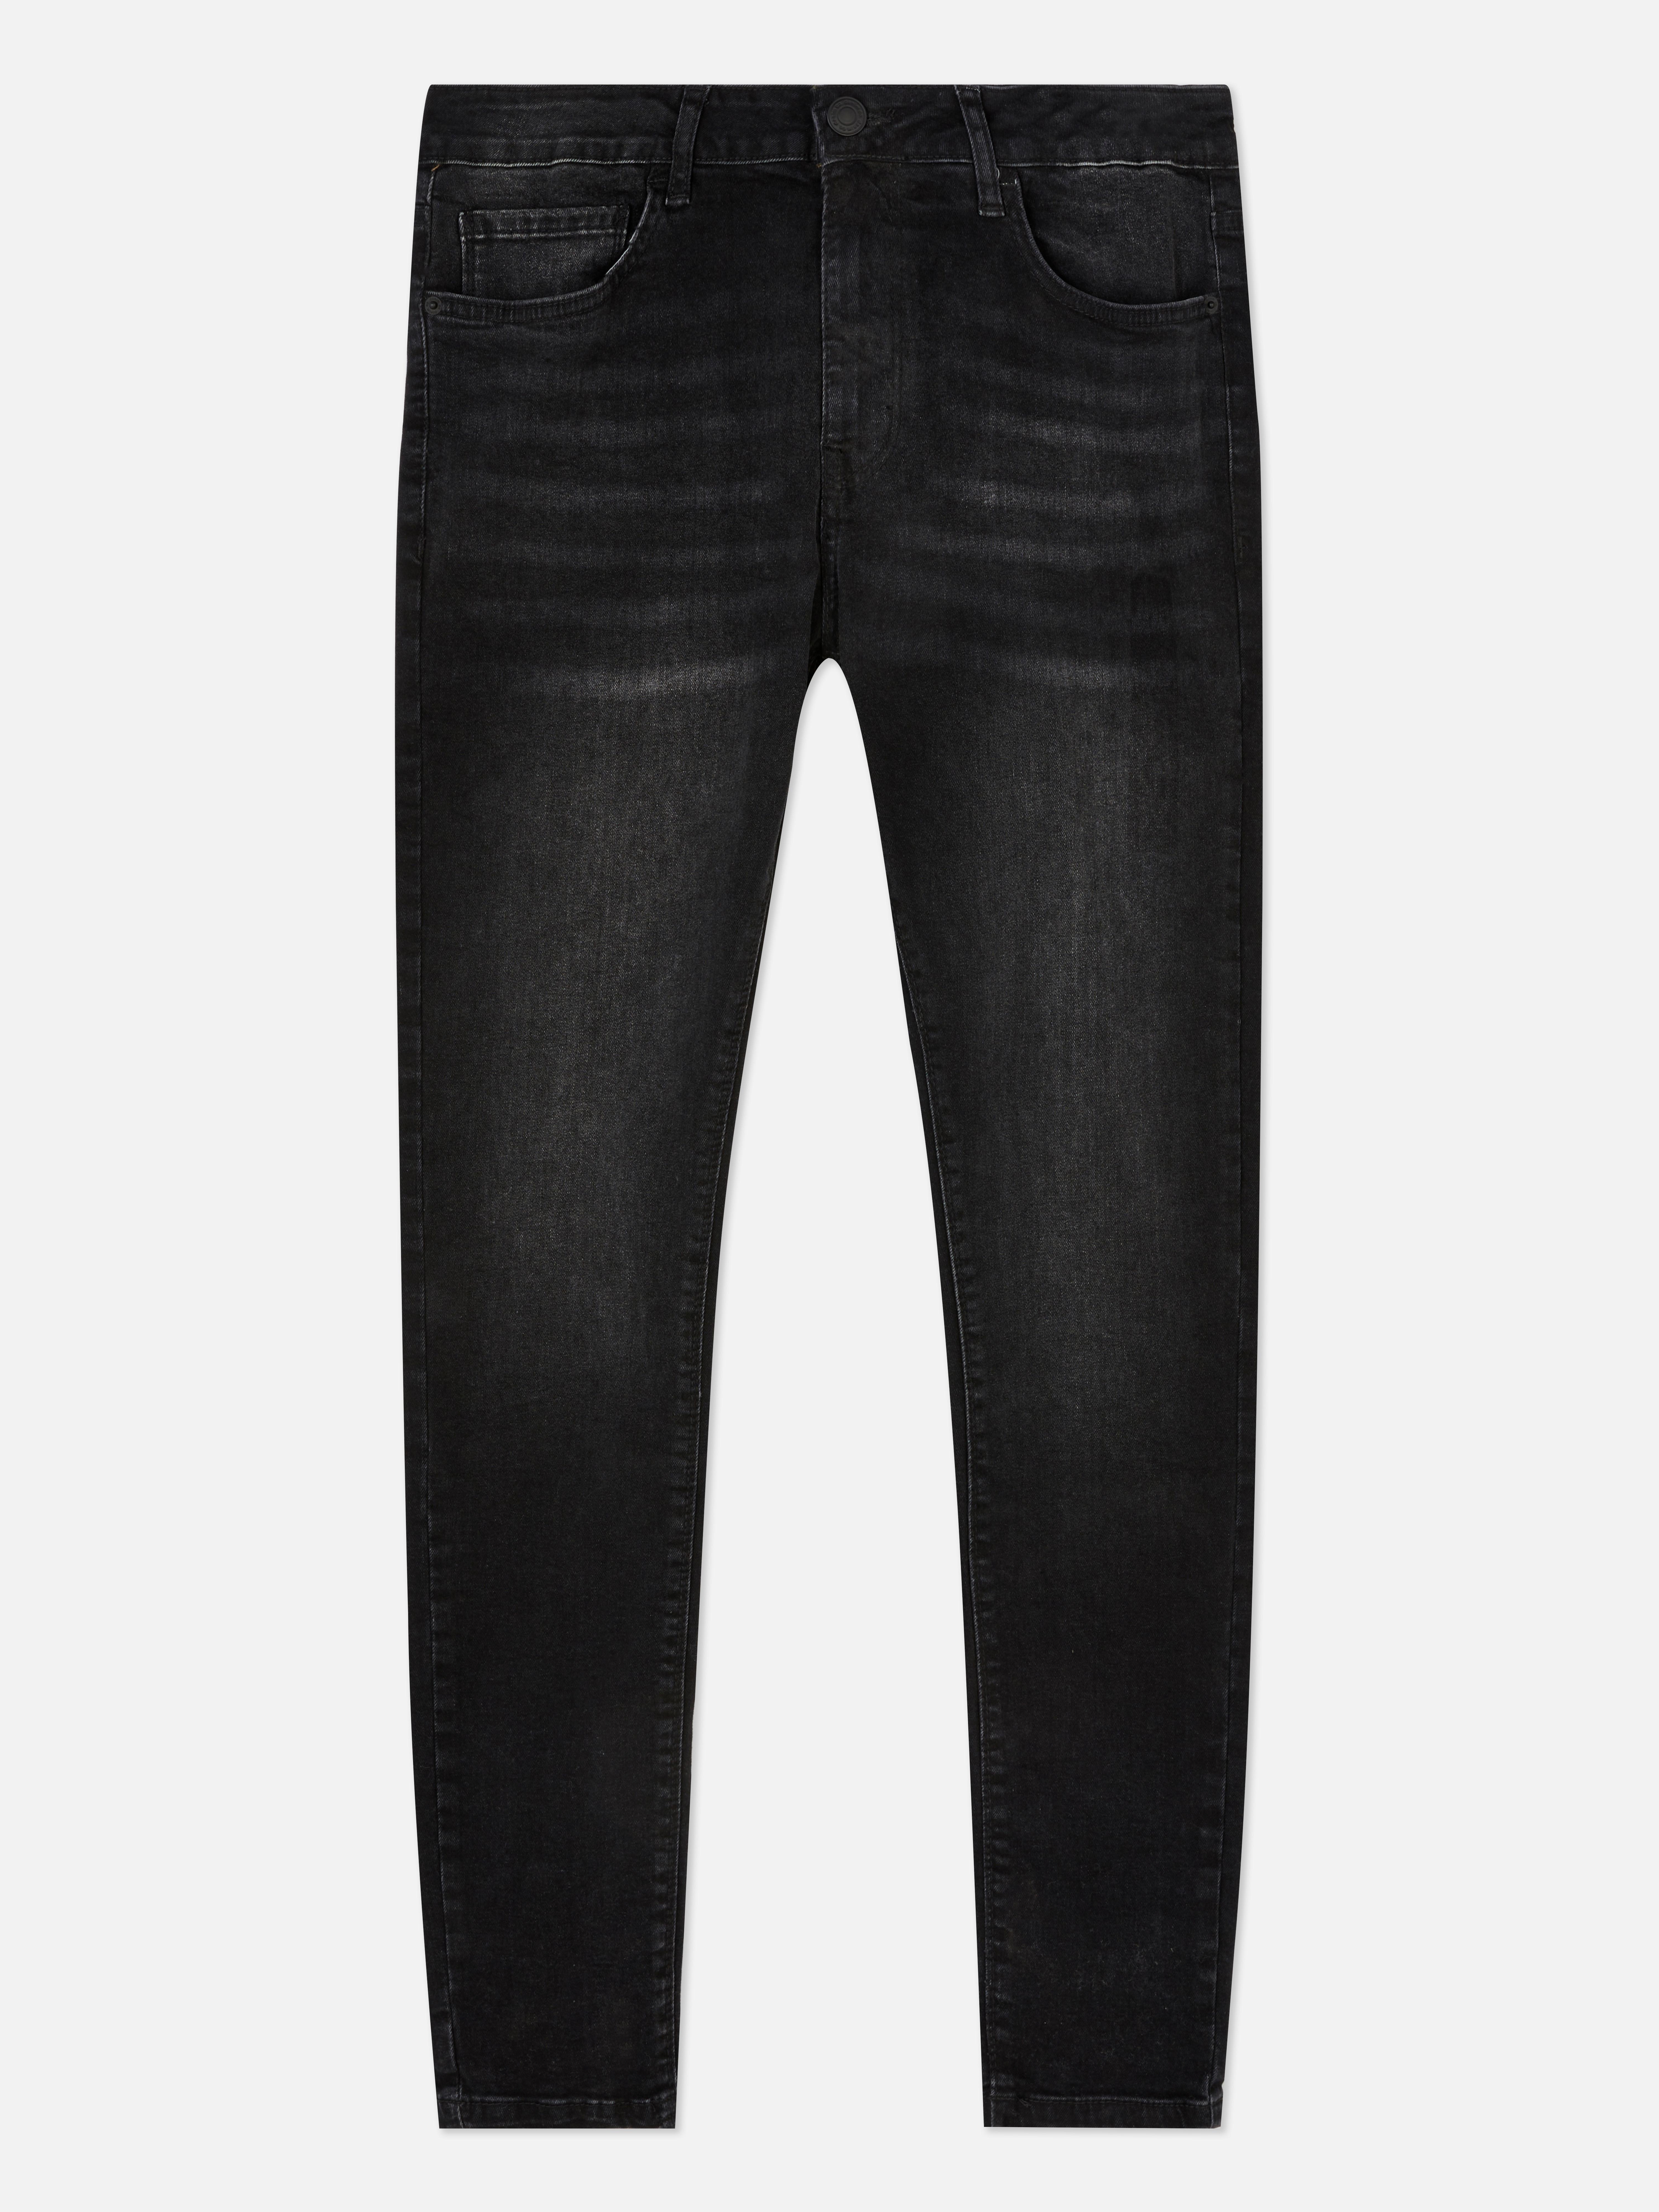 Washed Effect Super Stretch Skinny Jeans